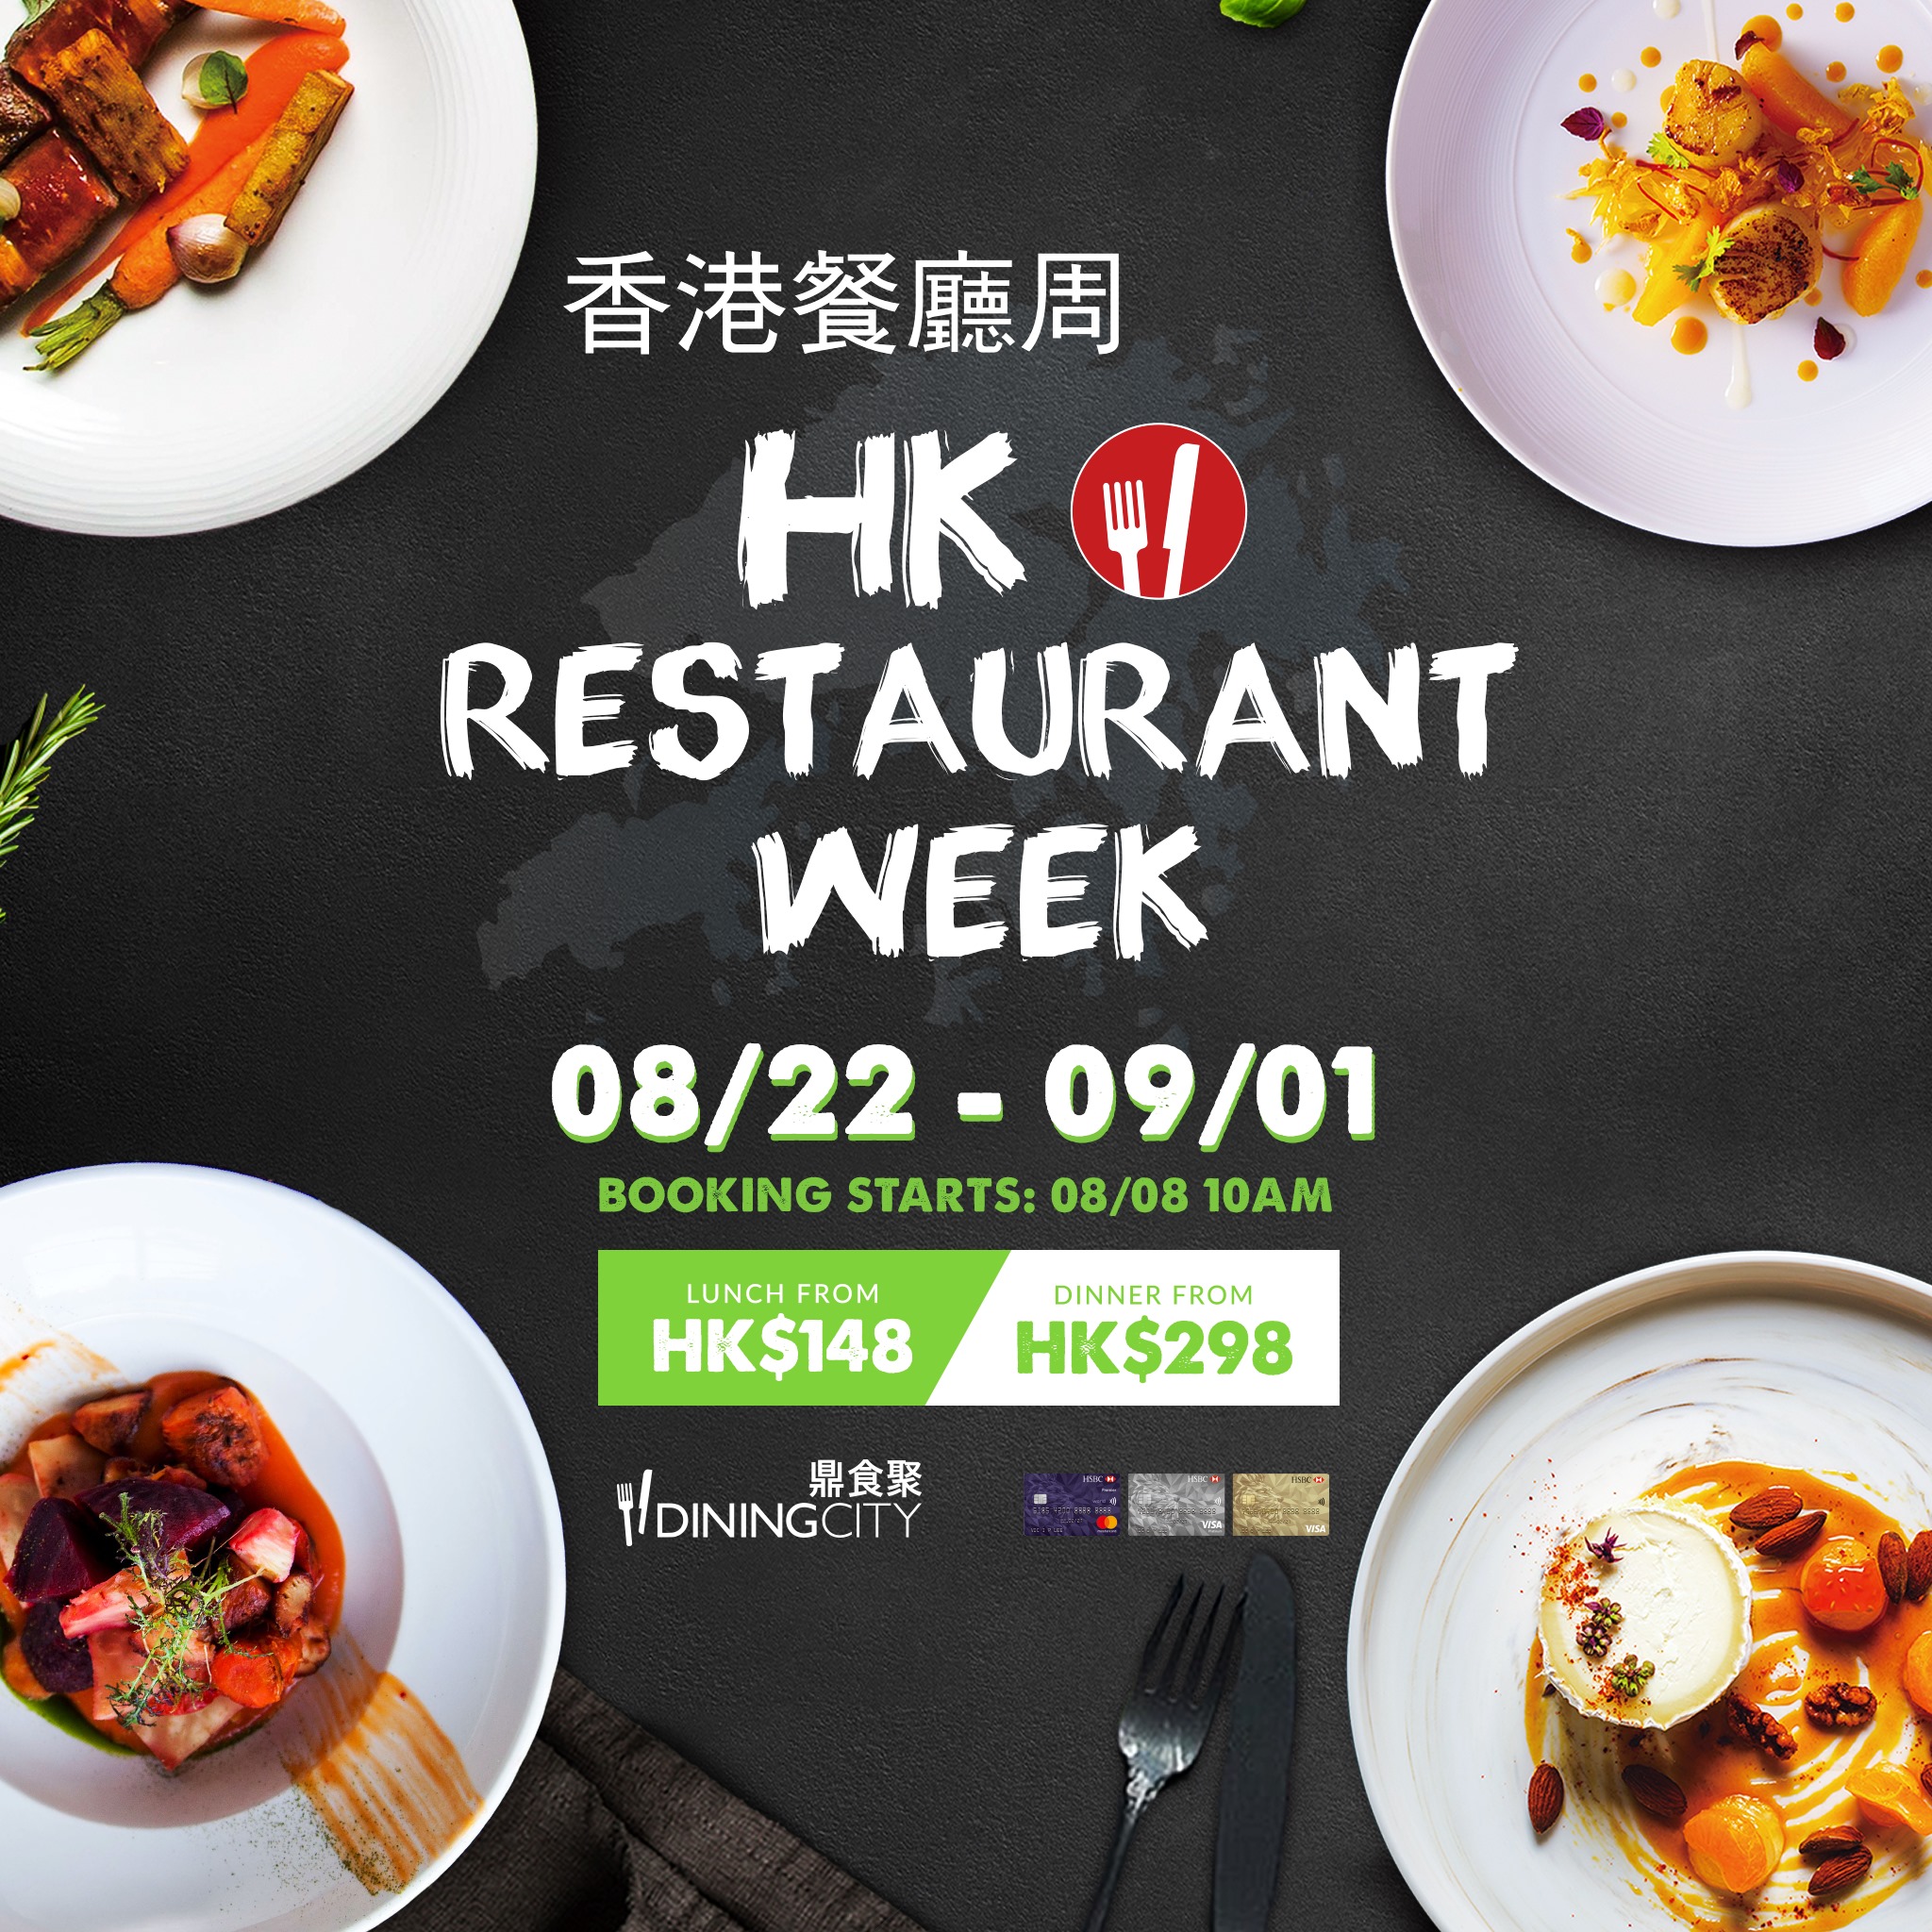 Celebrate Hong Kong's Restaurant Week with a delicious authentic Italian Set Lunch ($198) or 5-Course Dinner ($398) at Ciao Chow in Lan Kwai Fong. Our exclusive Restaurant Week offer is available 22 August to 1 September. Buon Appetito! 